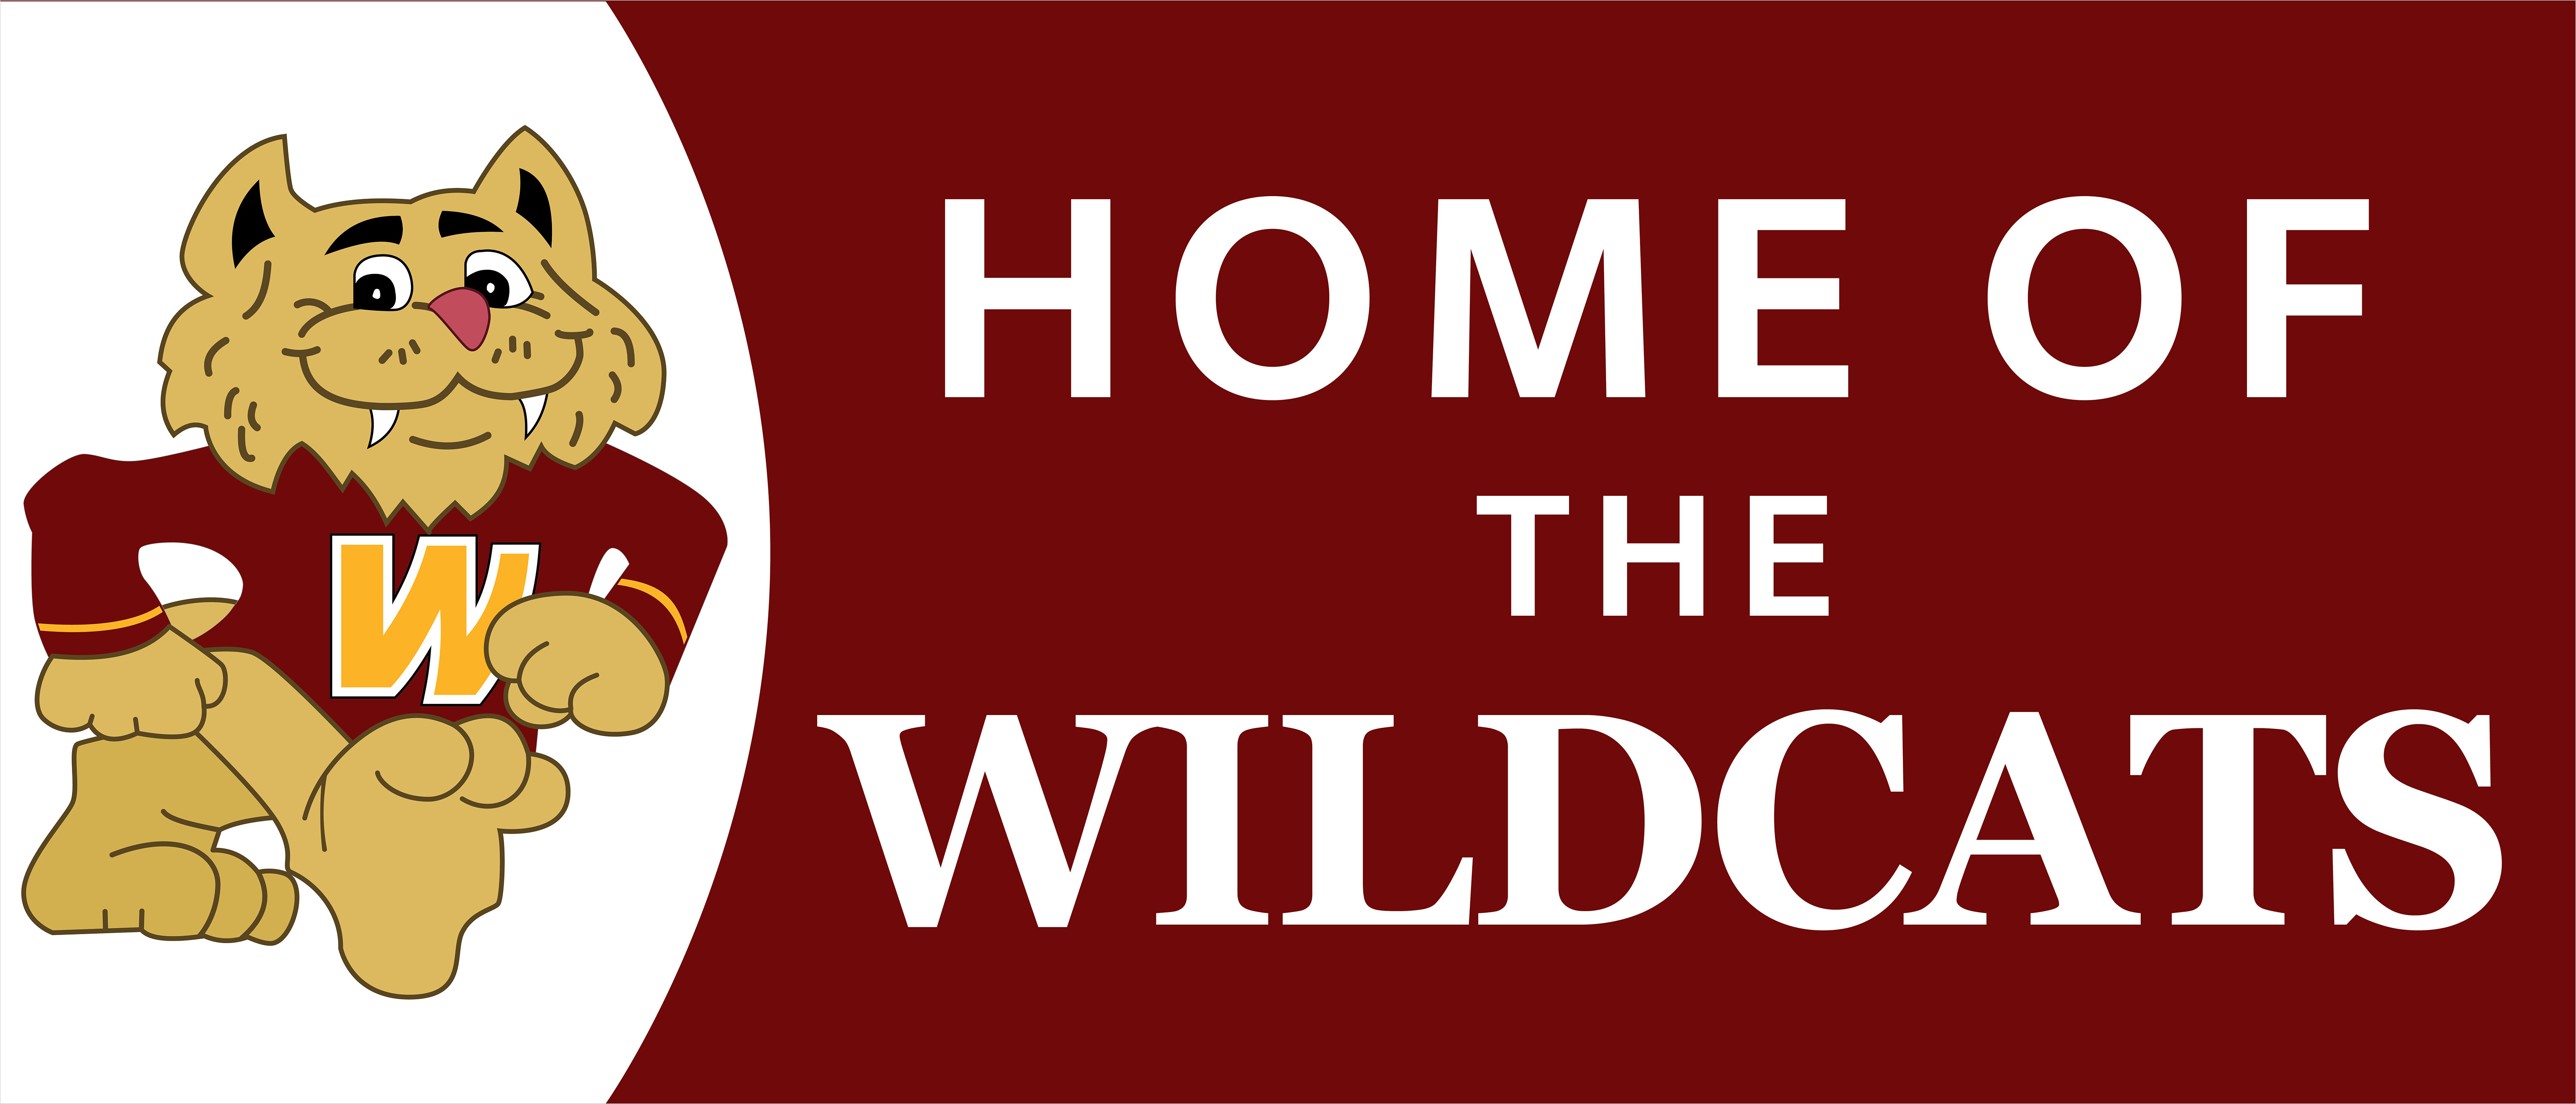 Home of the Wildcats Sign